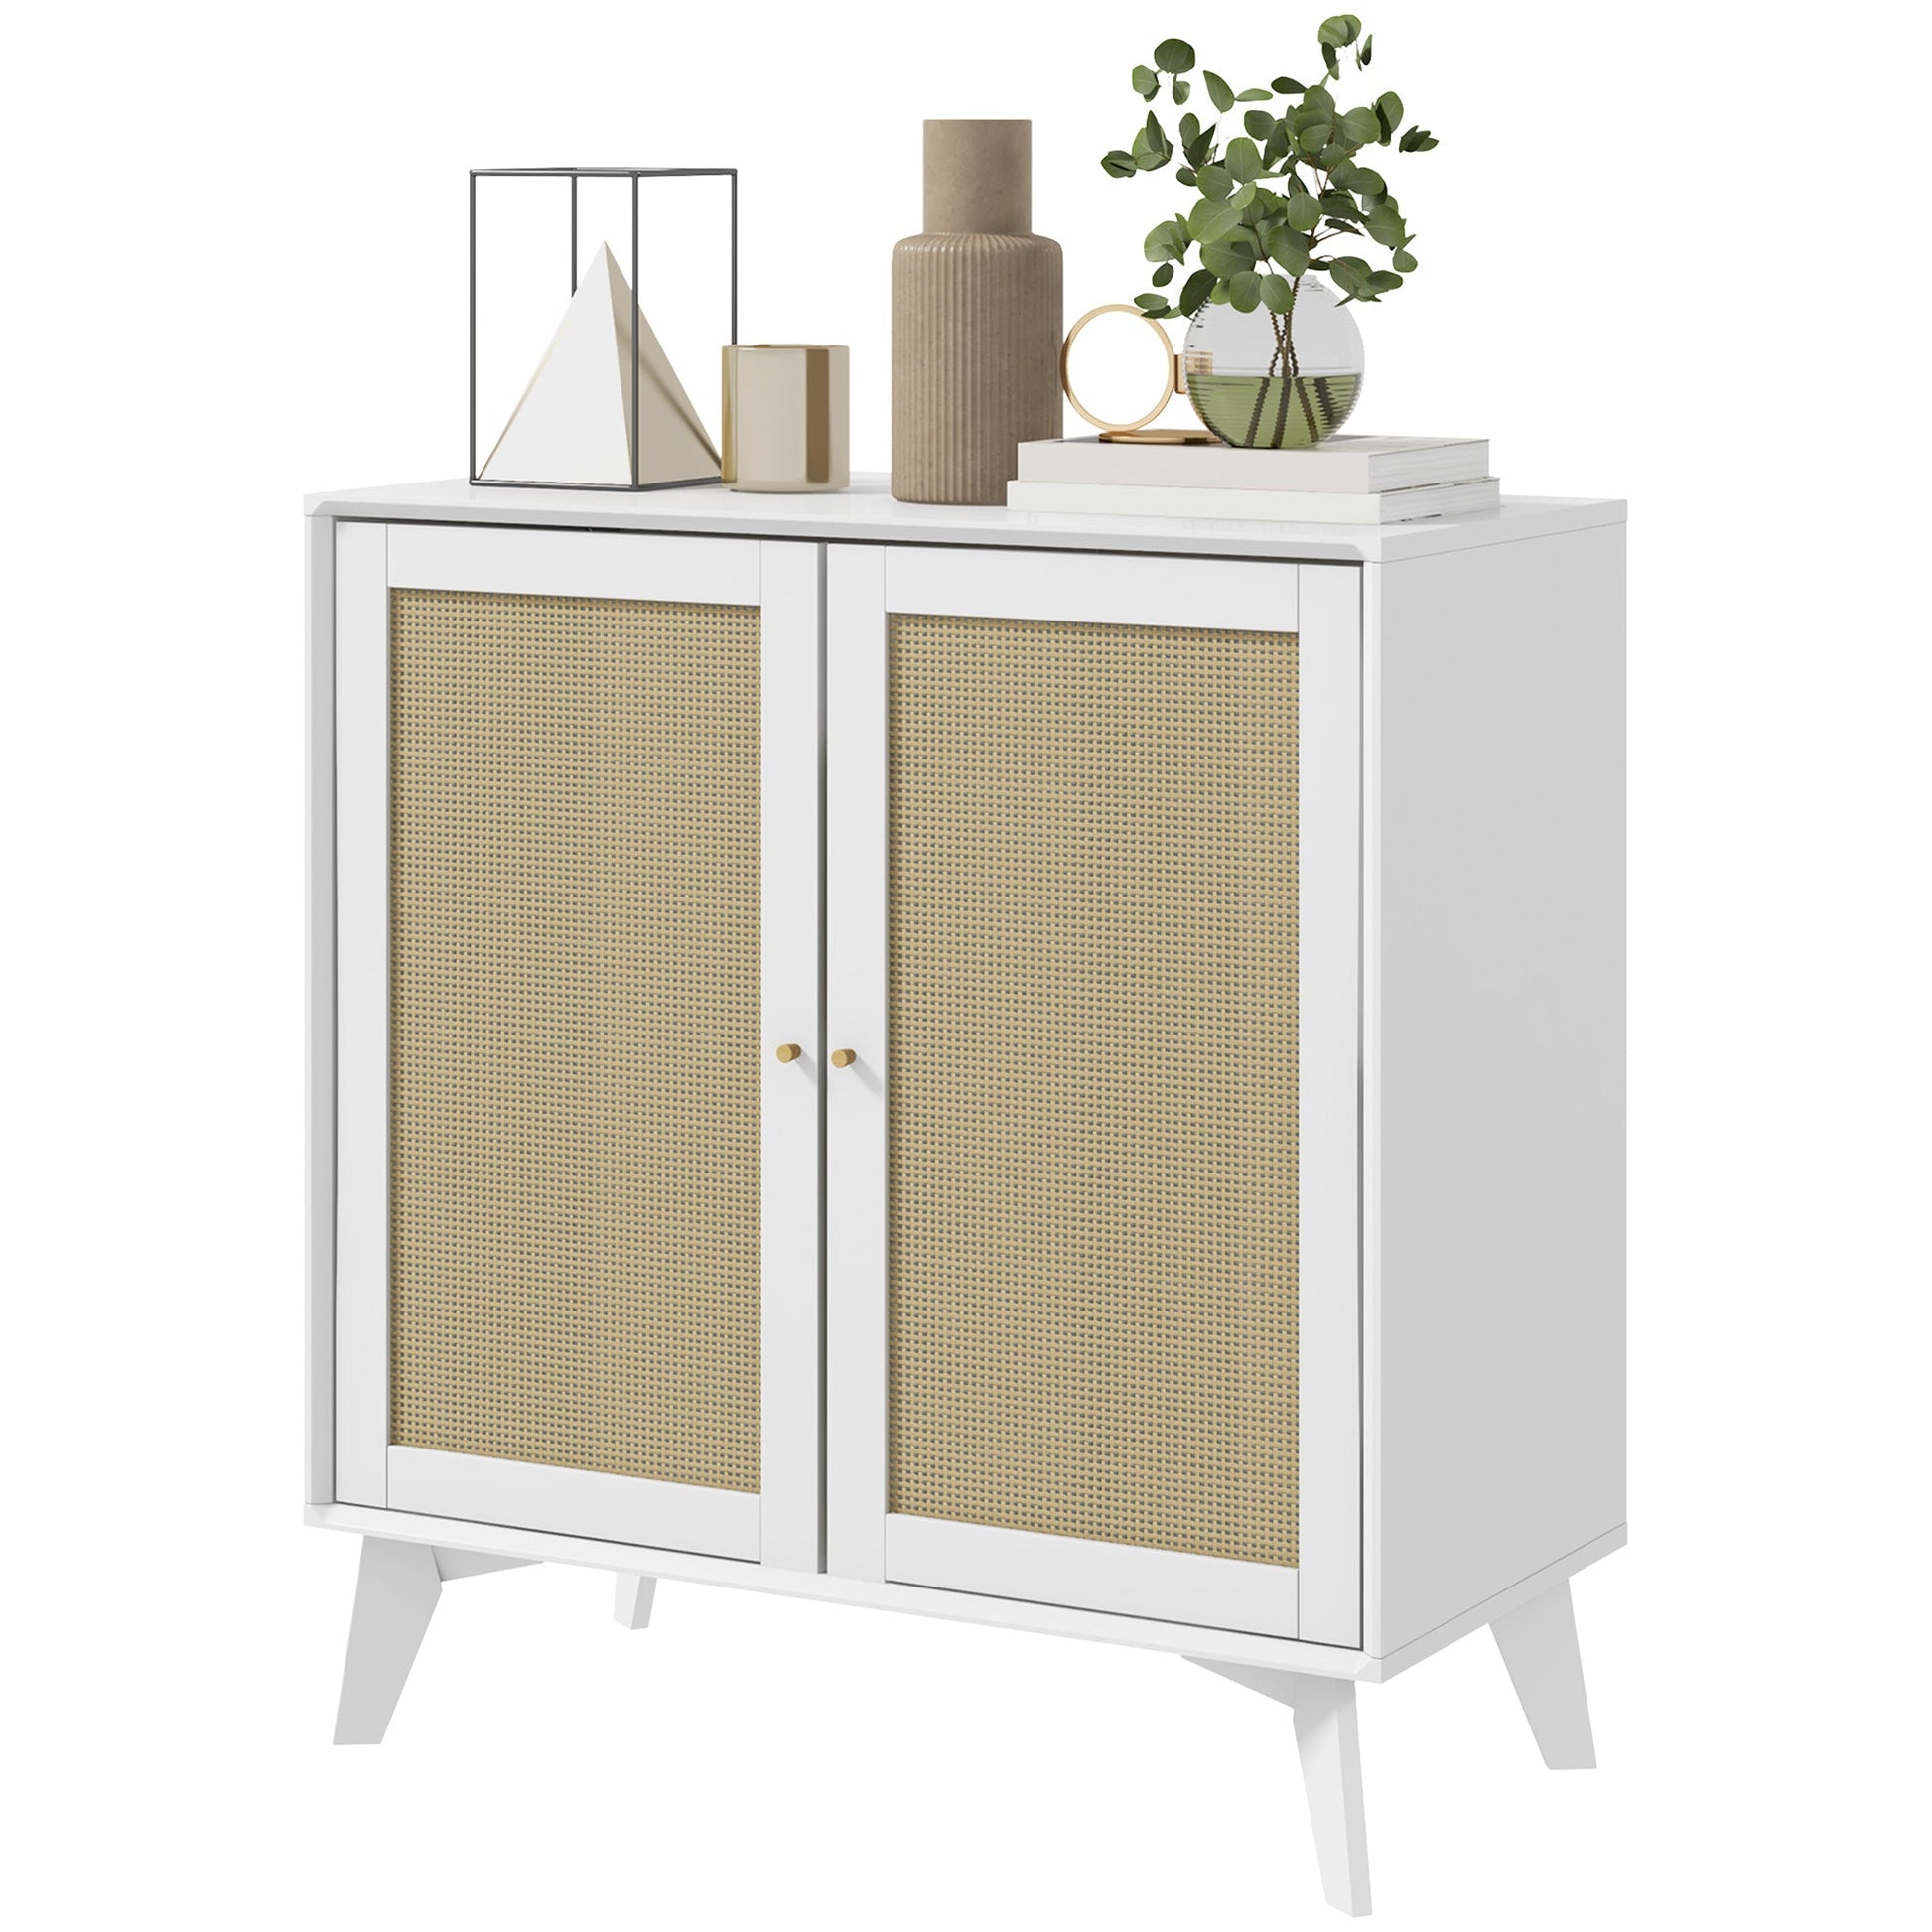 Boho Sideboard Cabinet, Freestanding Sideboards and Buffets with 2 Rattan Doors and Adjustable Shelf - Gallery Canada